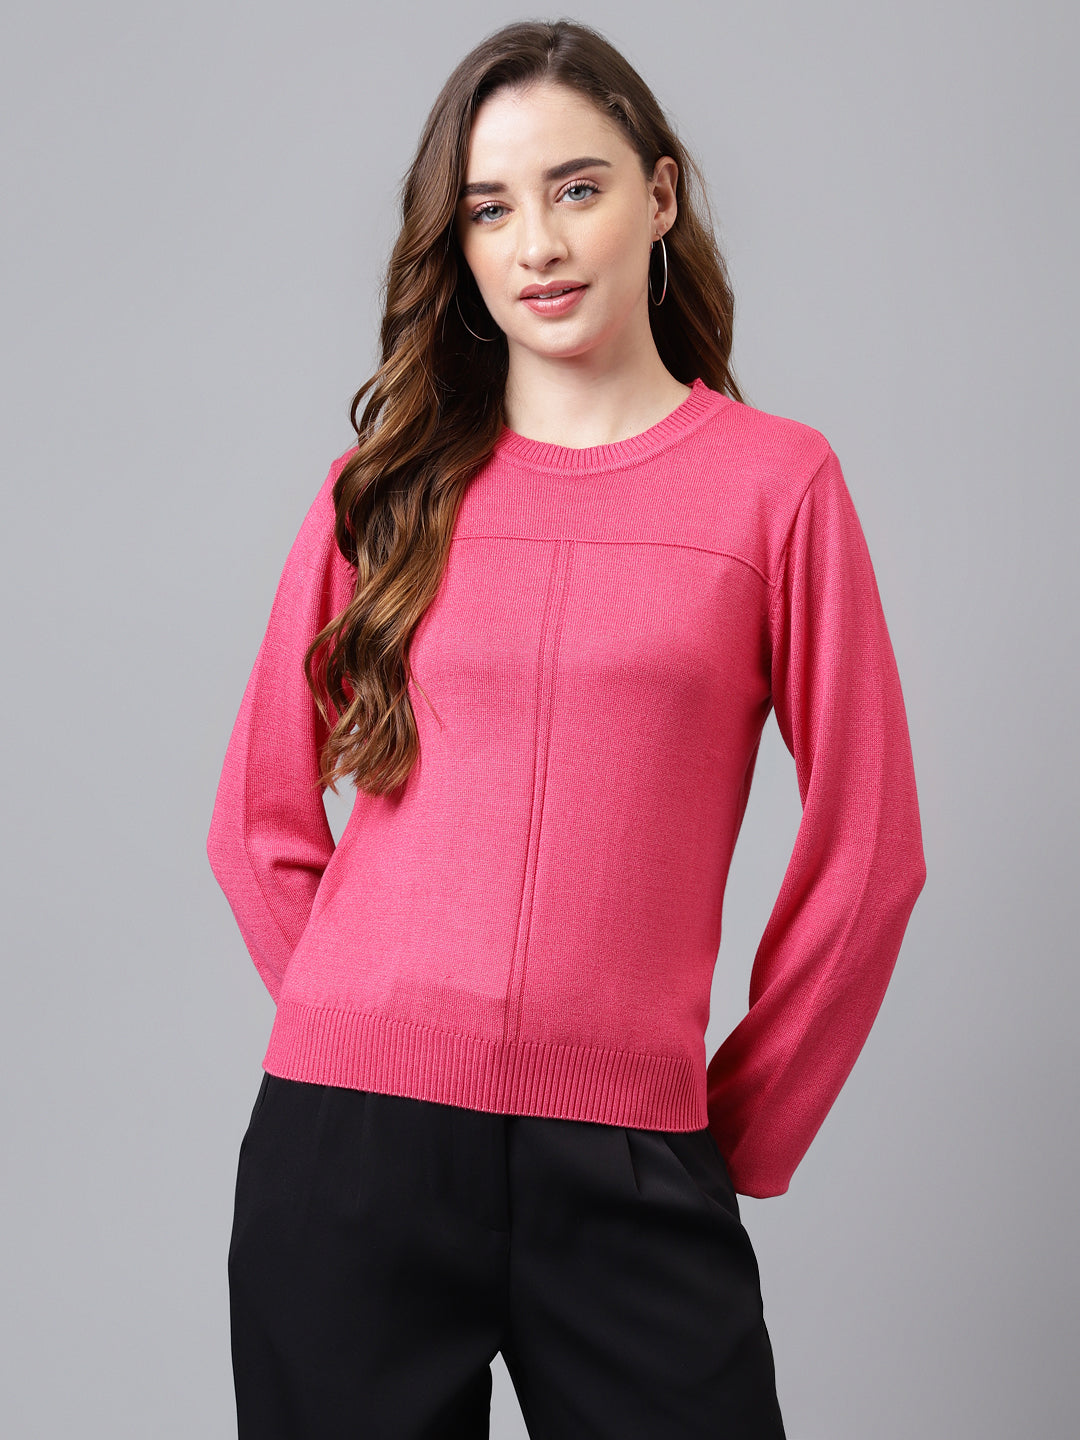 Fuchsia Full Sleeve Solid Women Pullover Sweater Top for Casual